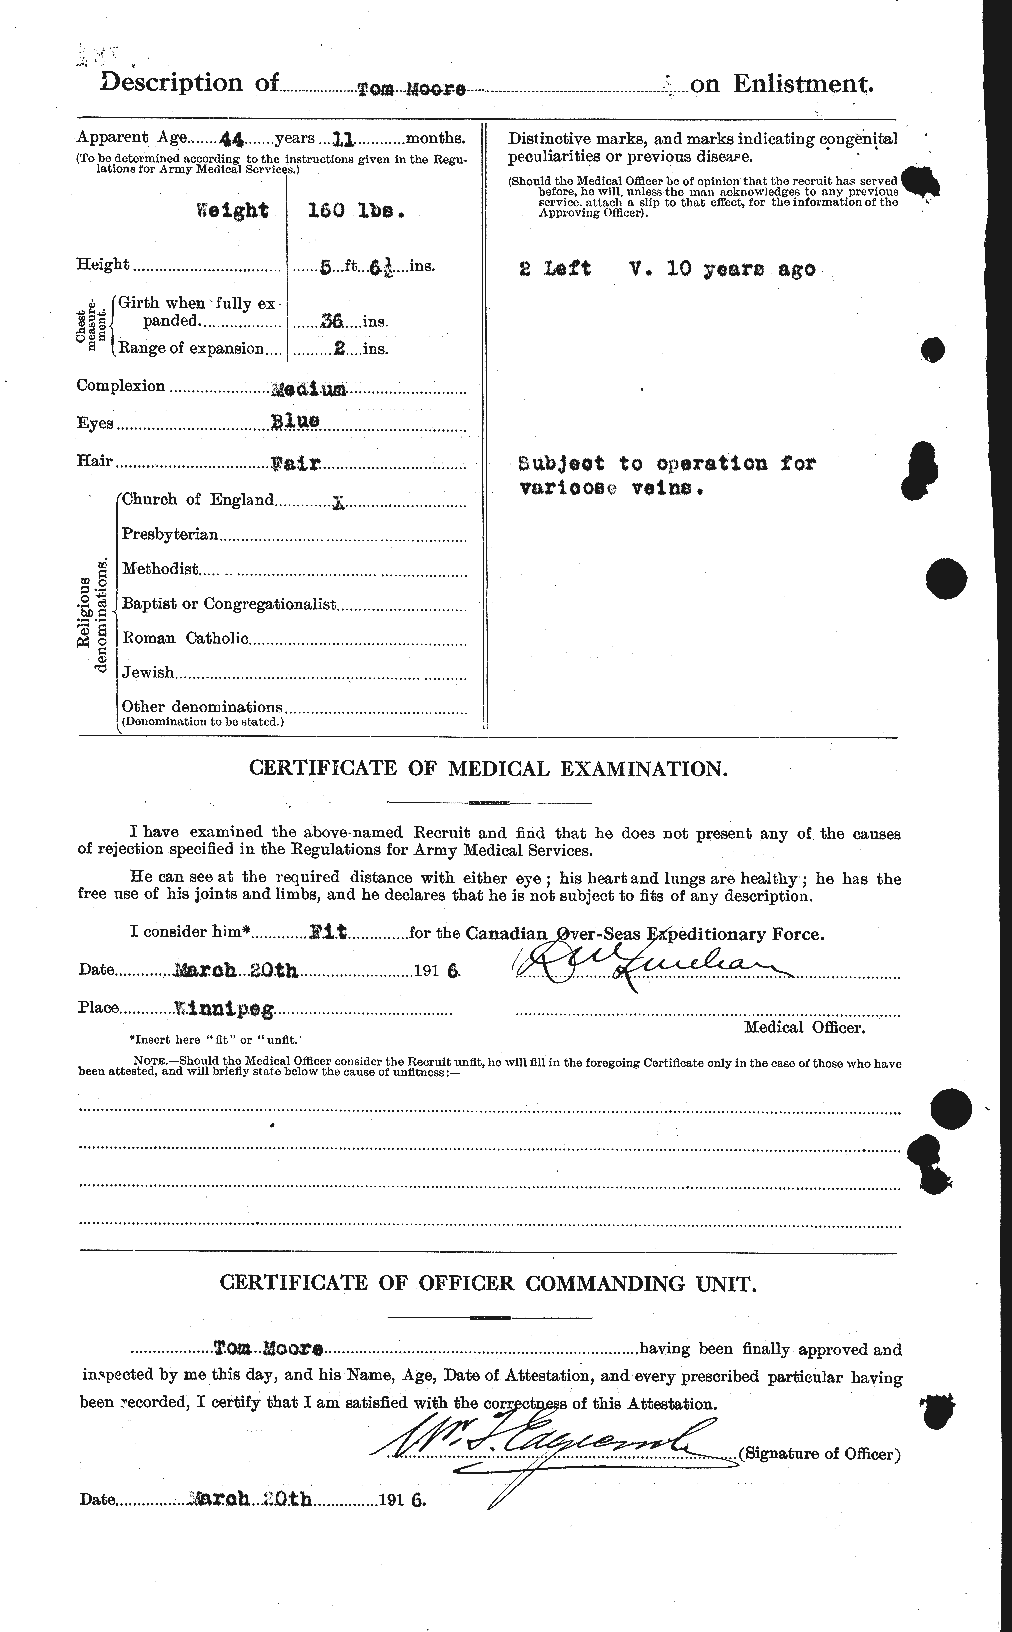 Personnel Records of the First World War - CEF 505679b